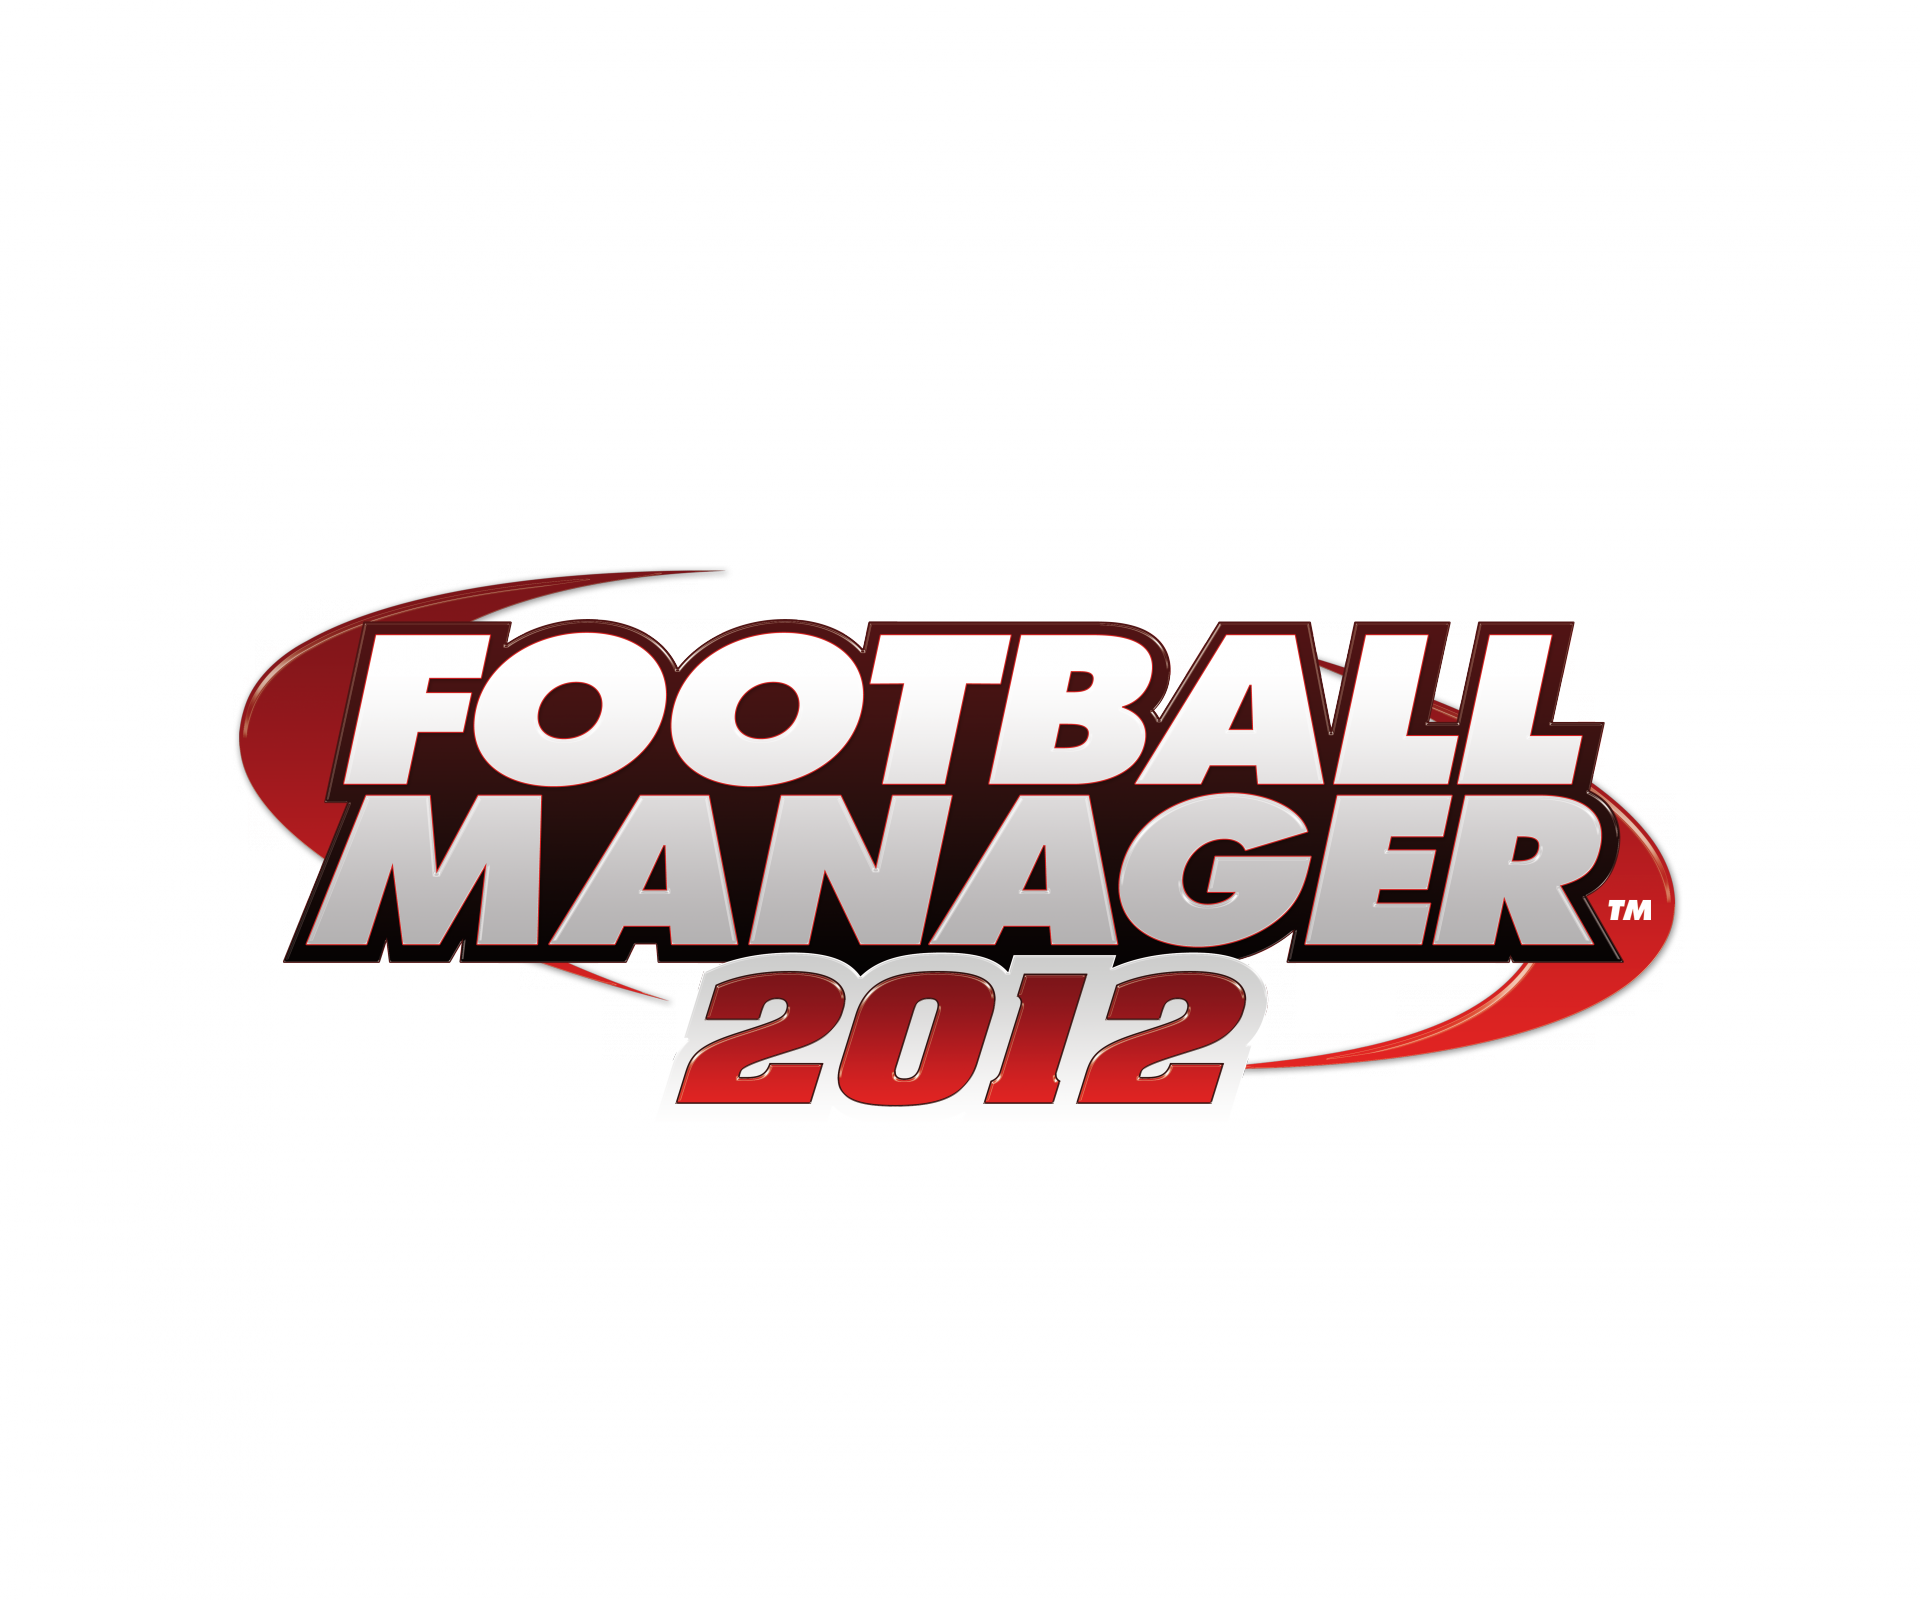 Football manager 2012 not steam фото 53